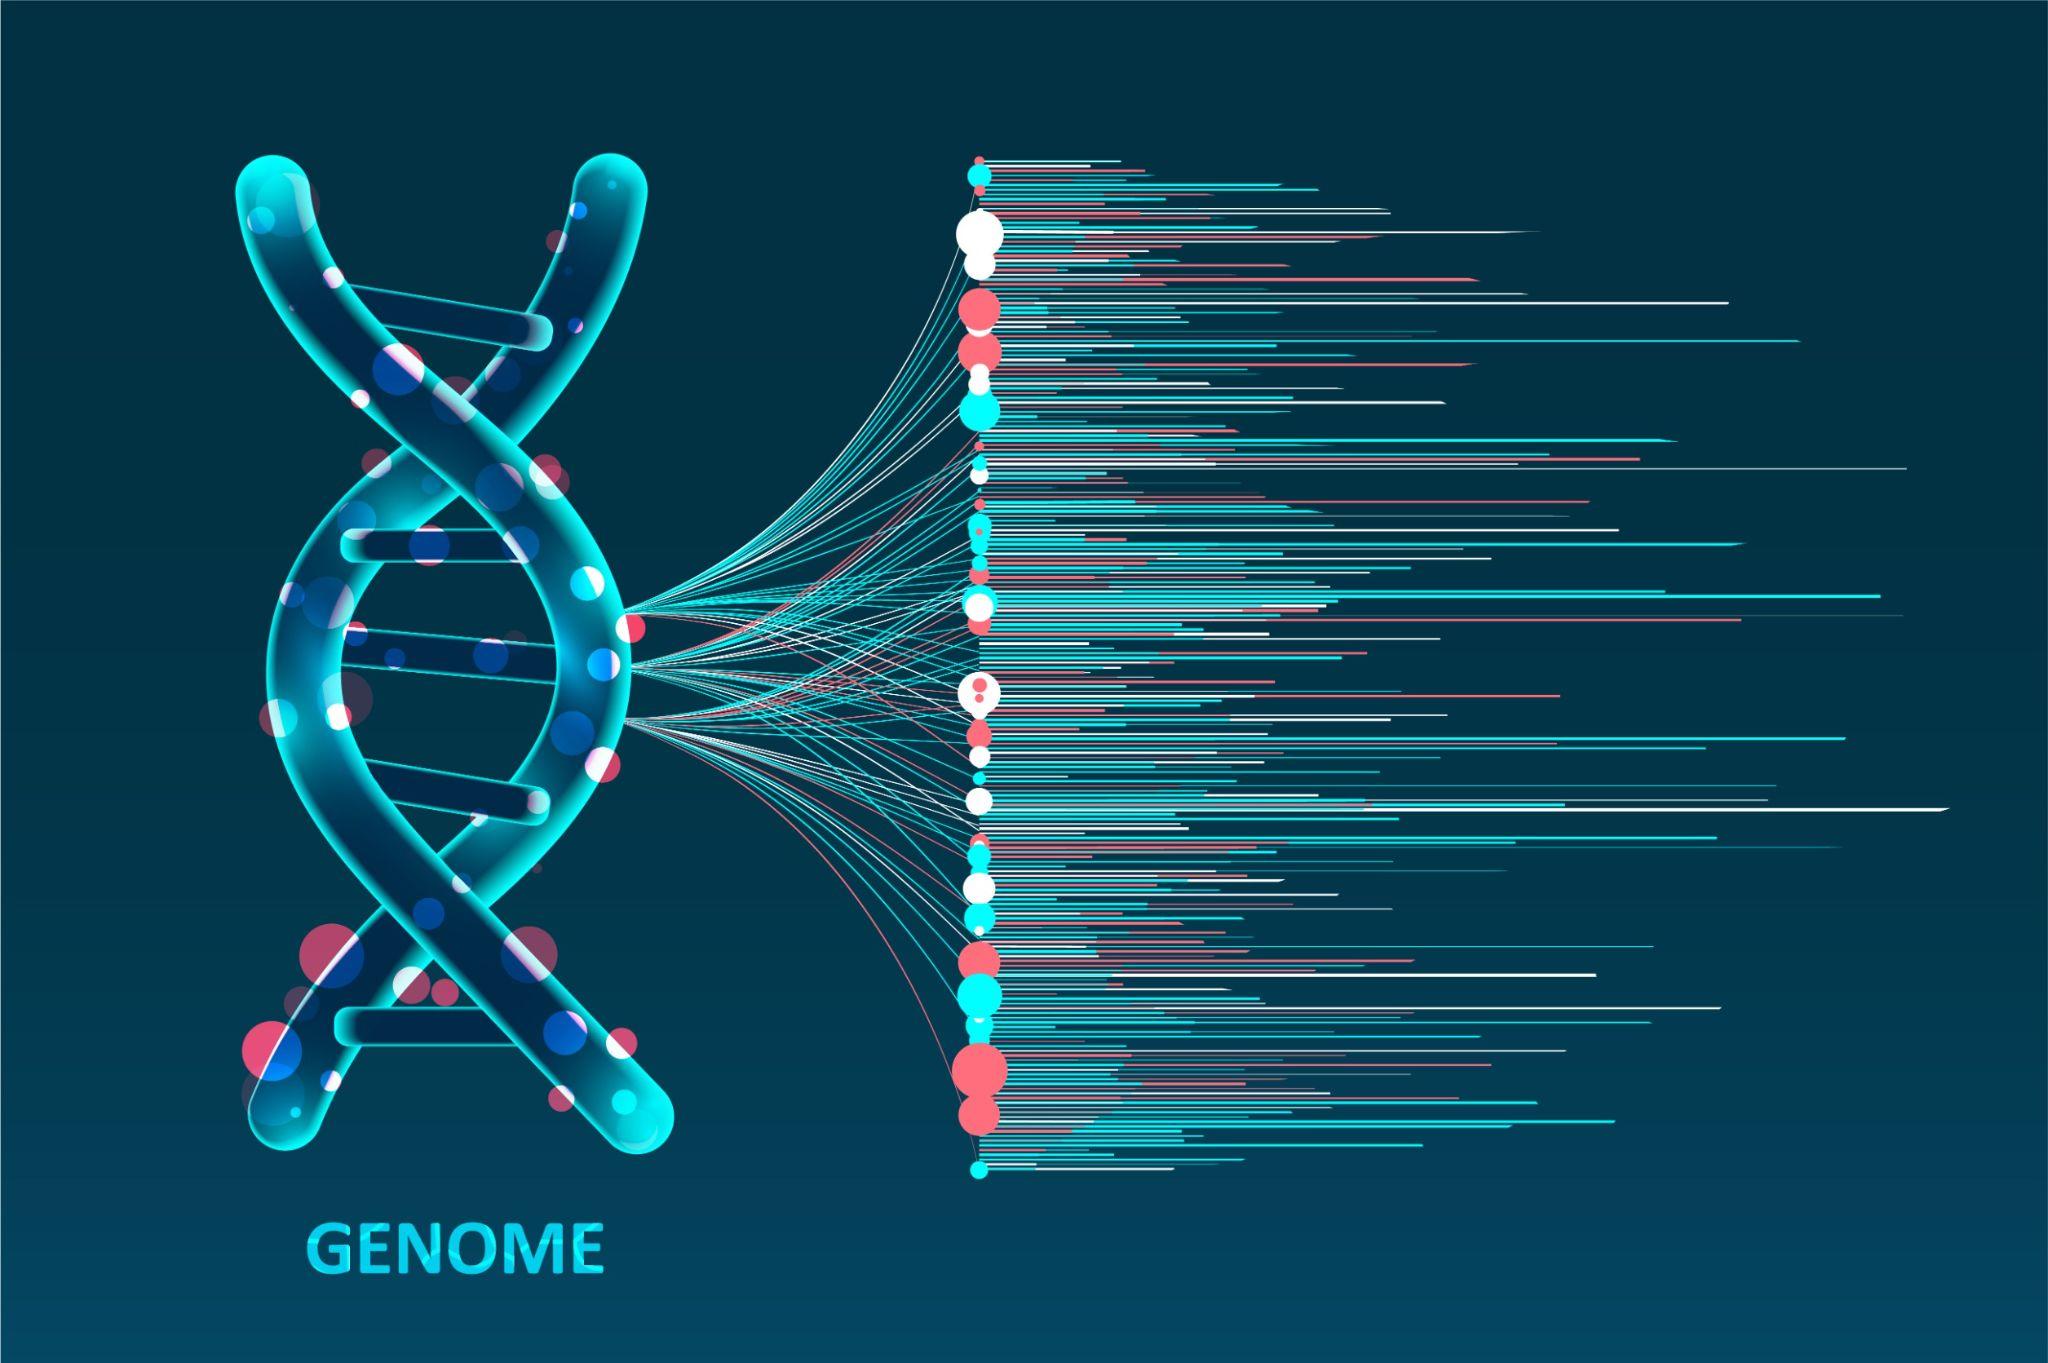 A vector image of a DNA with the word “Genome” underneath and clusters of lines sprouting from the double-helix.